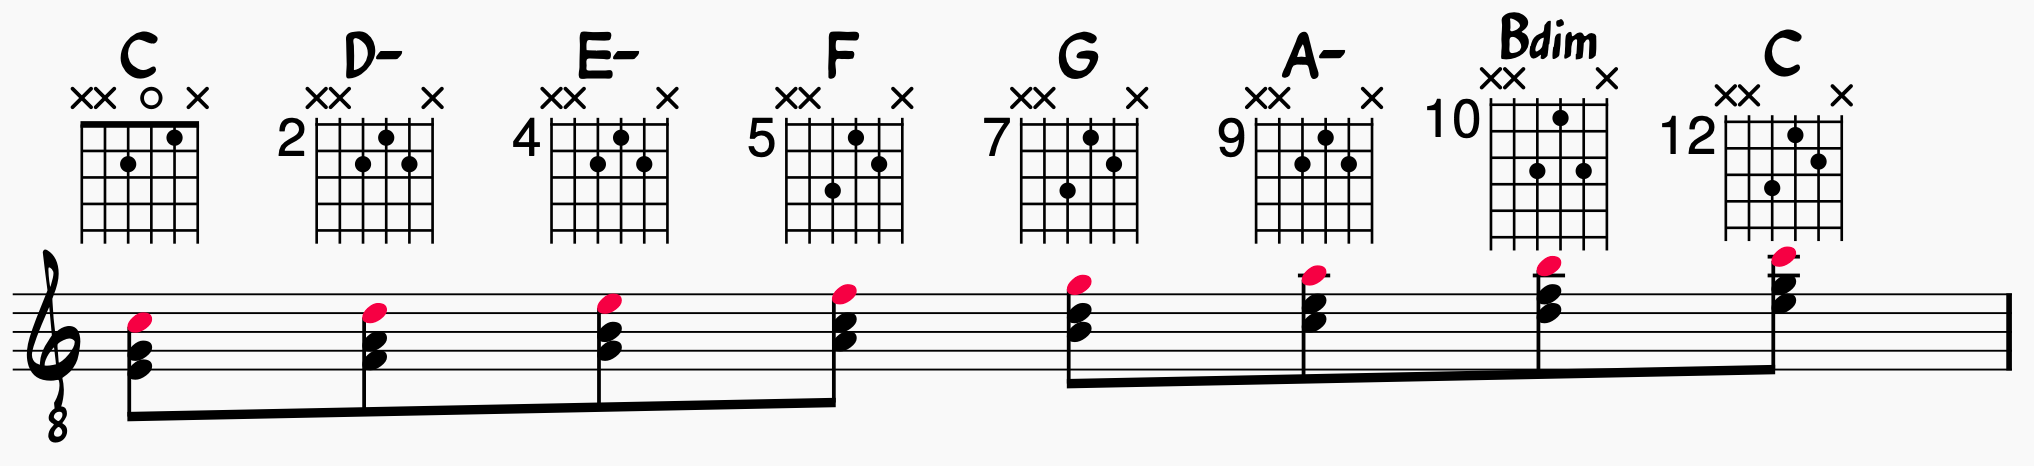 Chord Melody Basics: First Inversion Harmonized C Major Scale in C